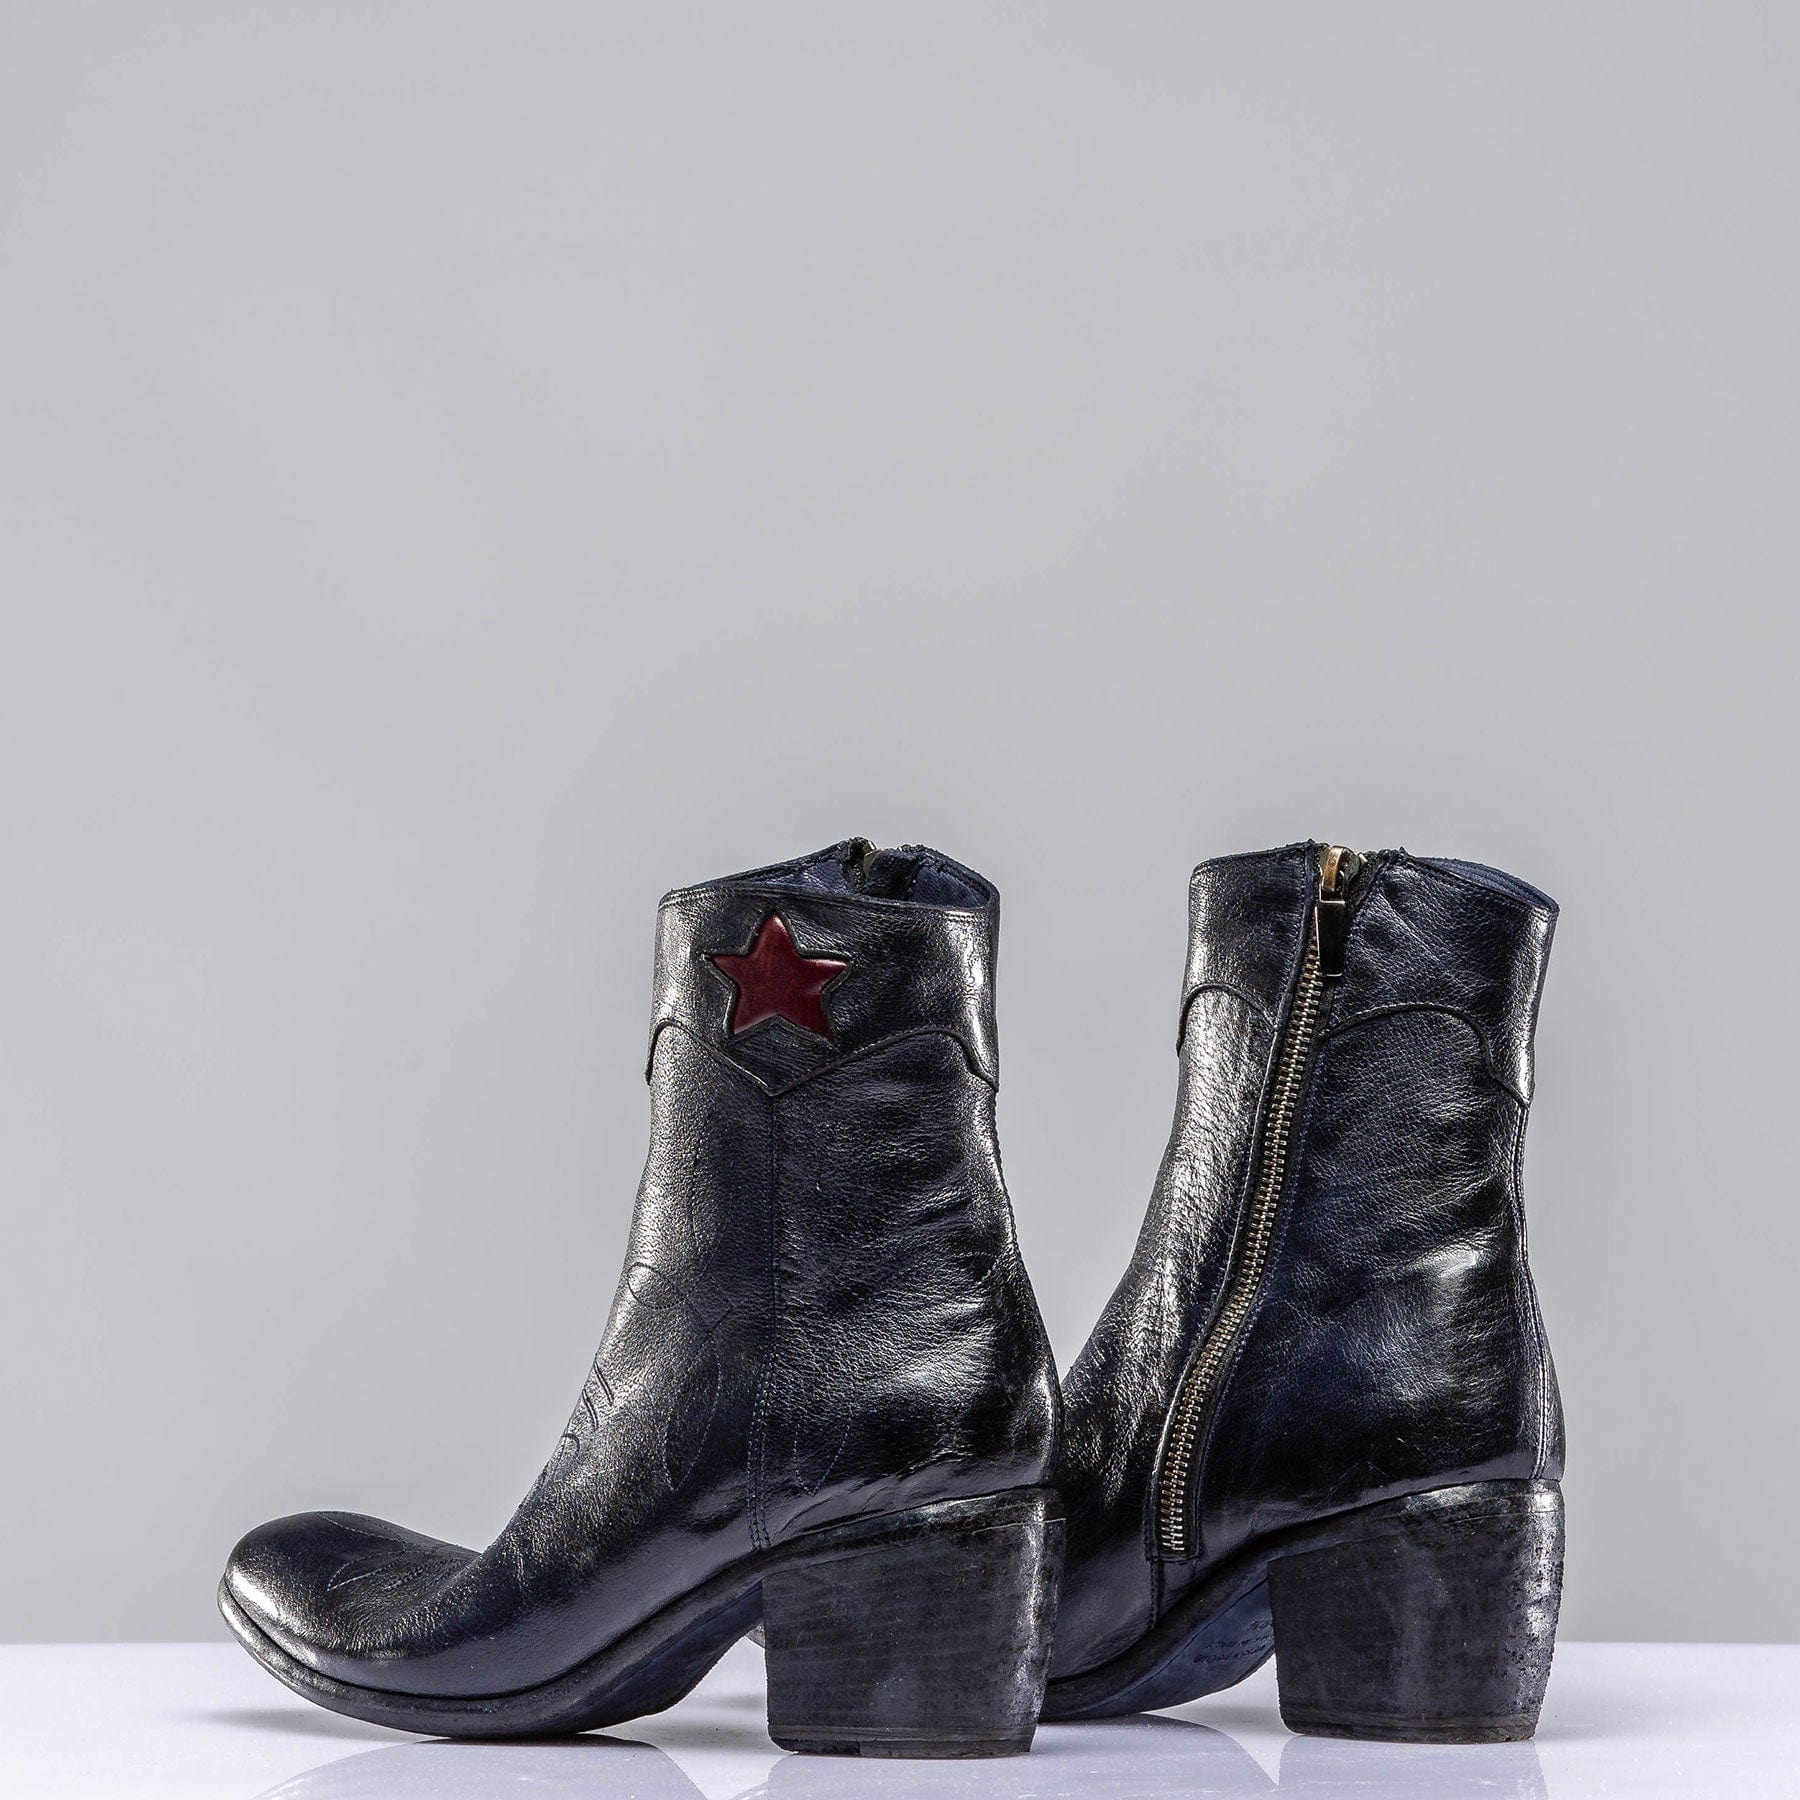 Stella Navy Boot W/ Red Star - AXEL'S